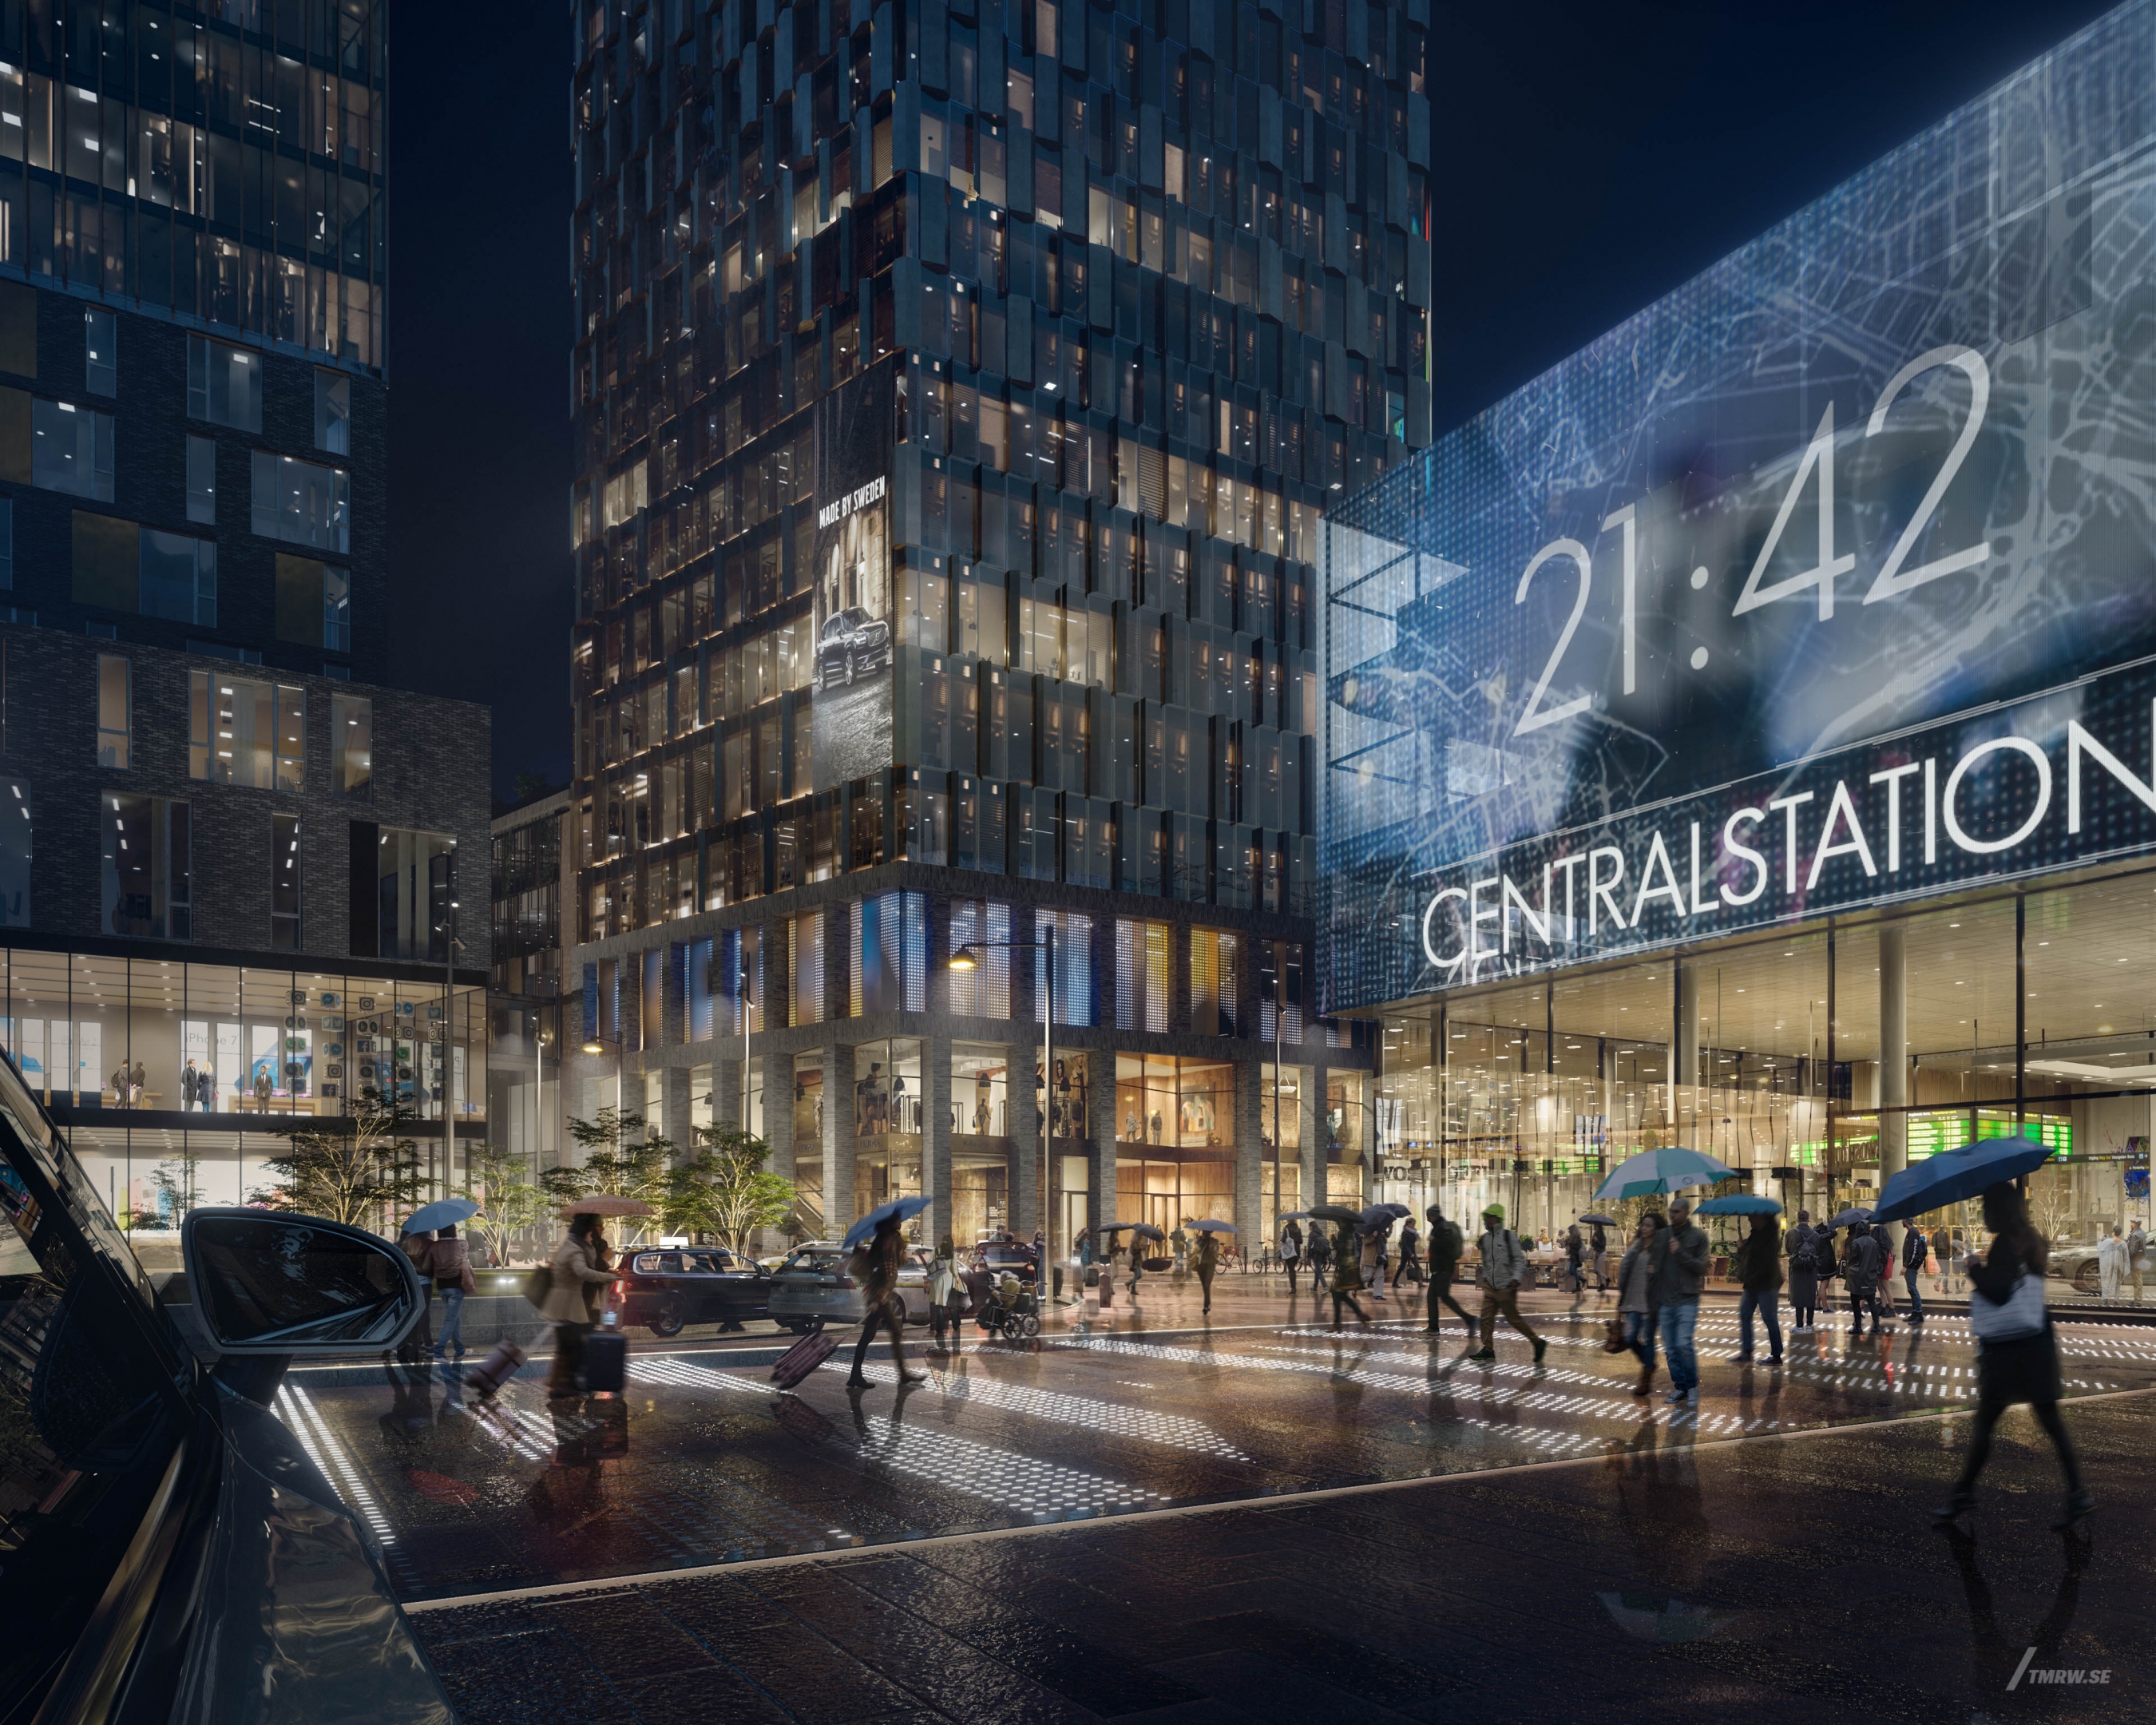 Architectural visualization of Region City for Jernhusen, exterior of centralstation a rainy night